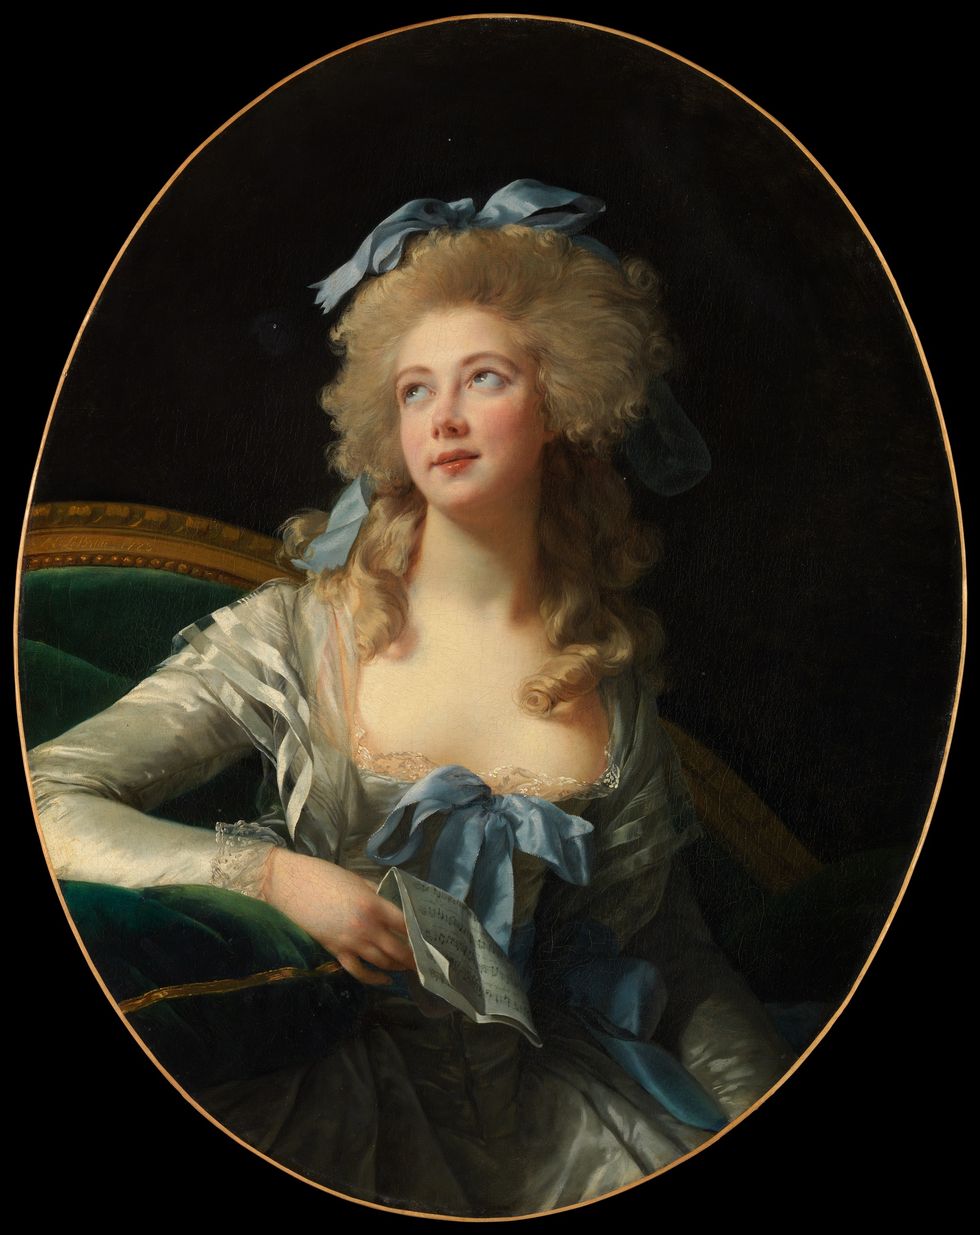 Madame Grand, by Vigee Le Brun, 1783